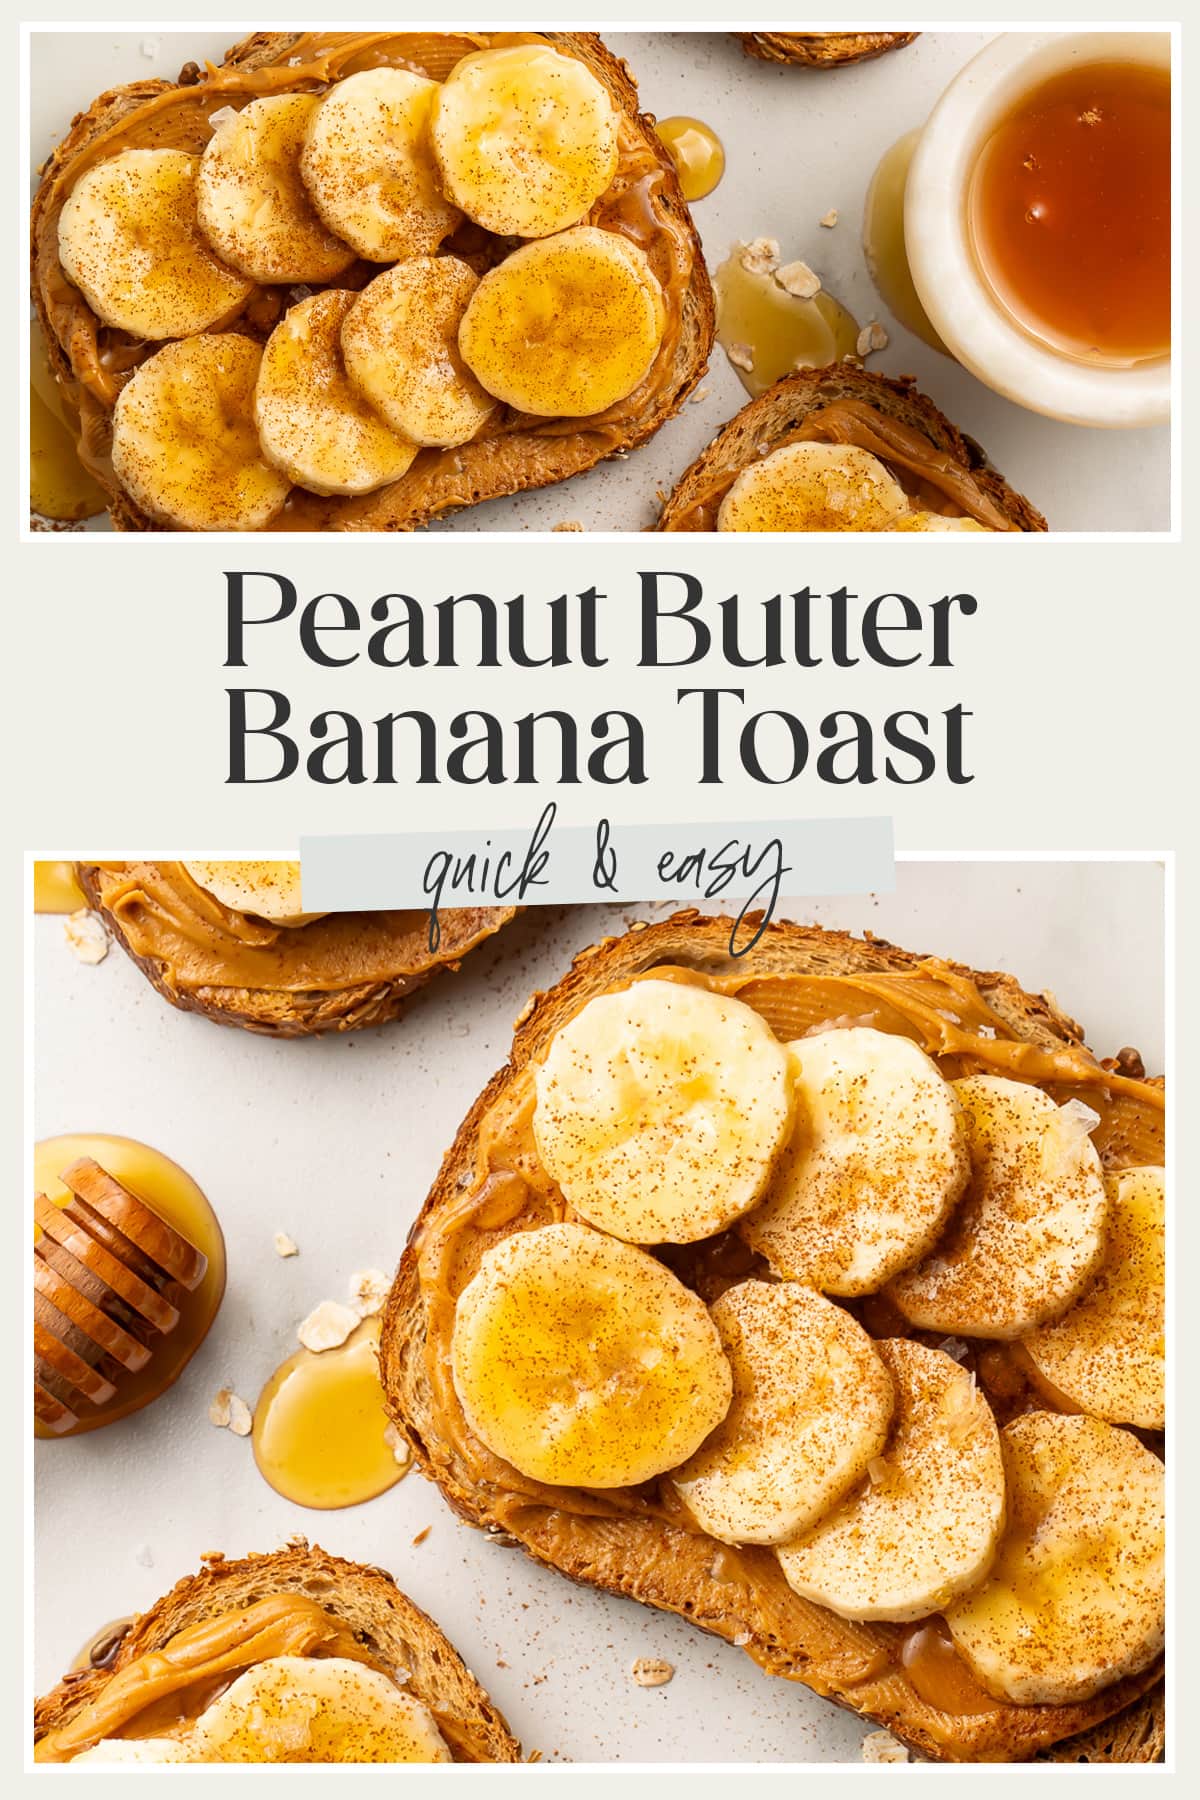 Pin graphic for peanut butter banana toast.